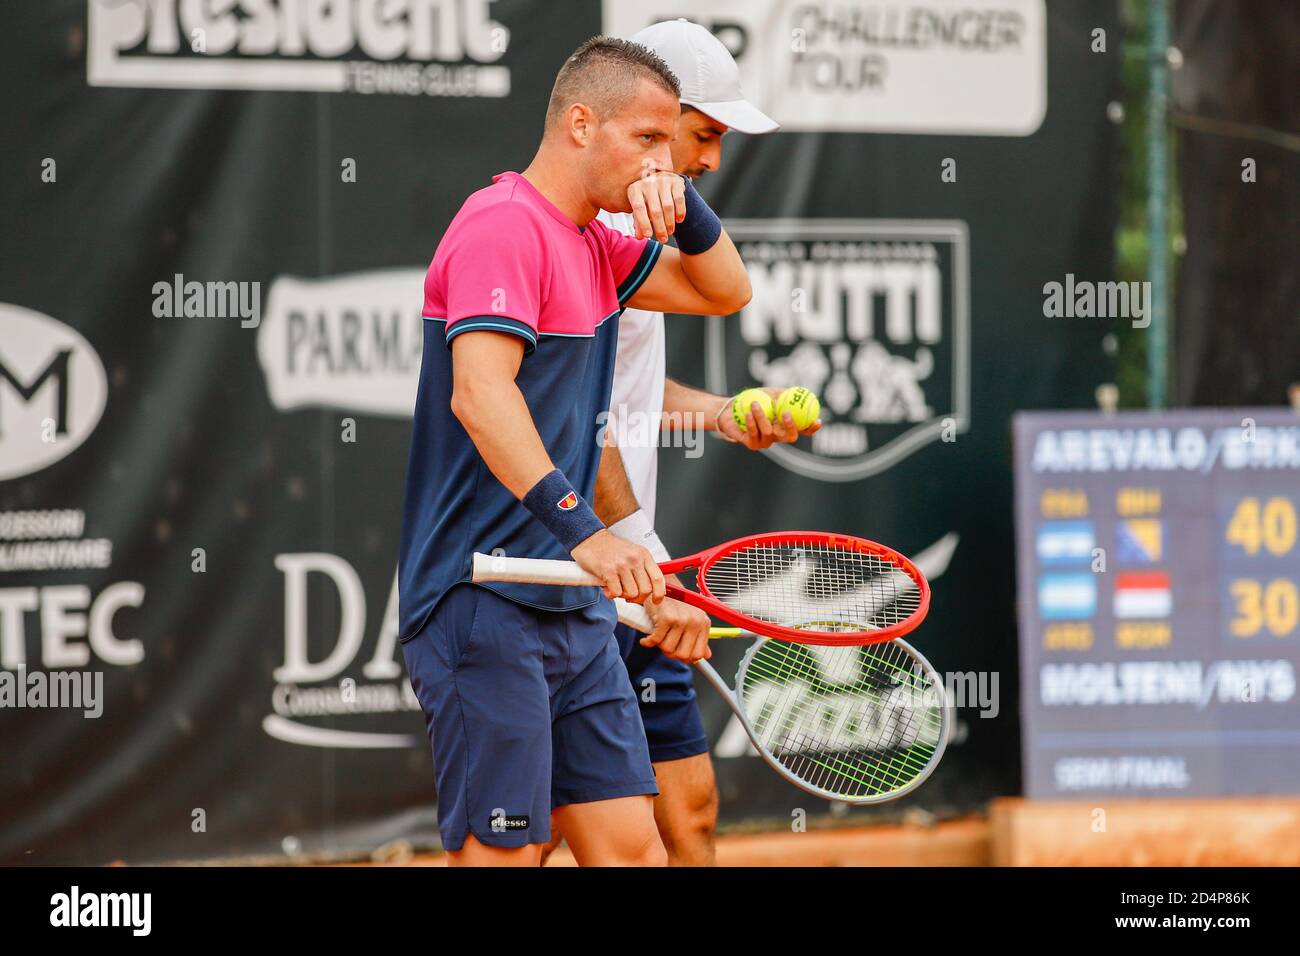 omislav Brkic - Marcelo Arevalo during ATP Challenger 125 - Internazionali  Emilia Romagna, Tennis Internationals, parma, Italy, 09 Oct 2020 Credit: LM  Stock Photo - Alamy